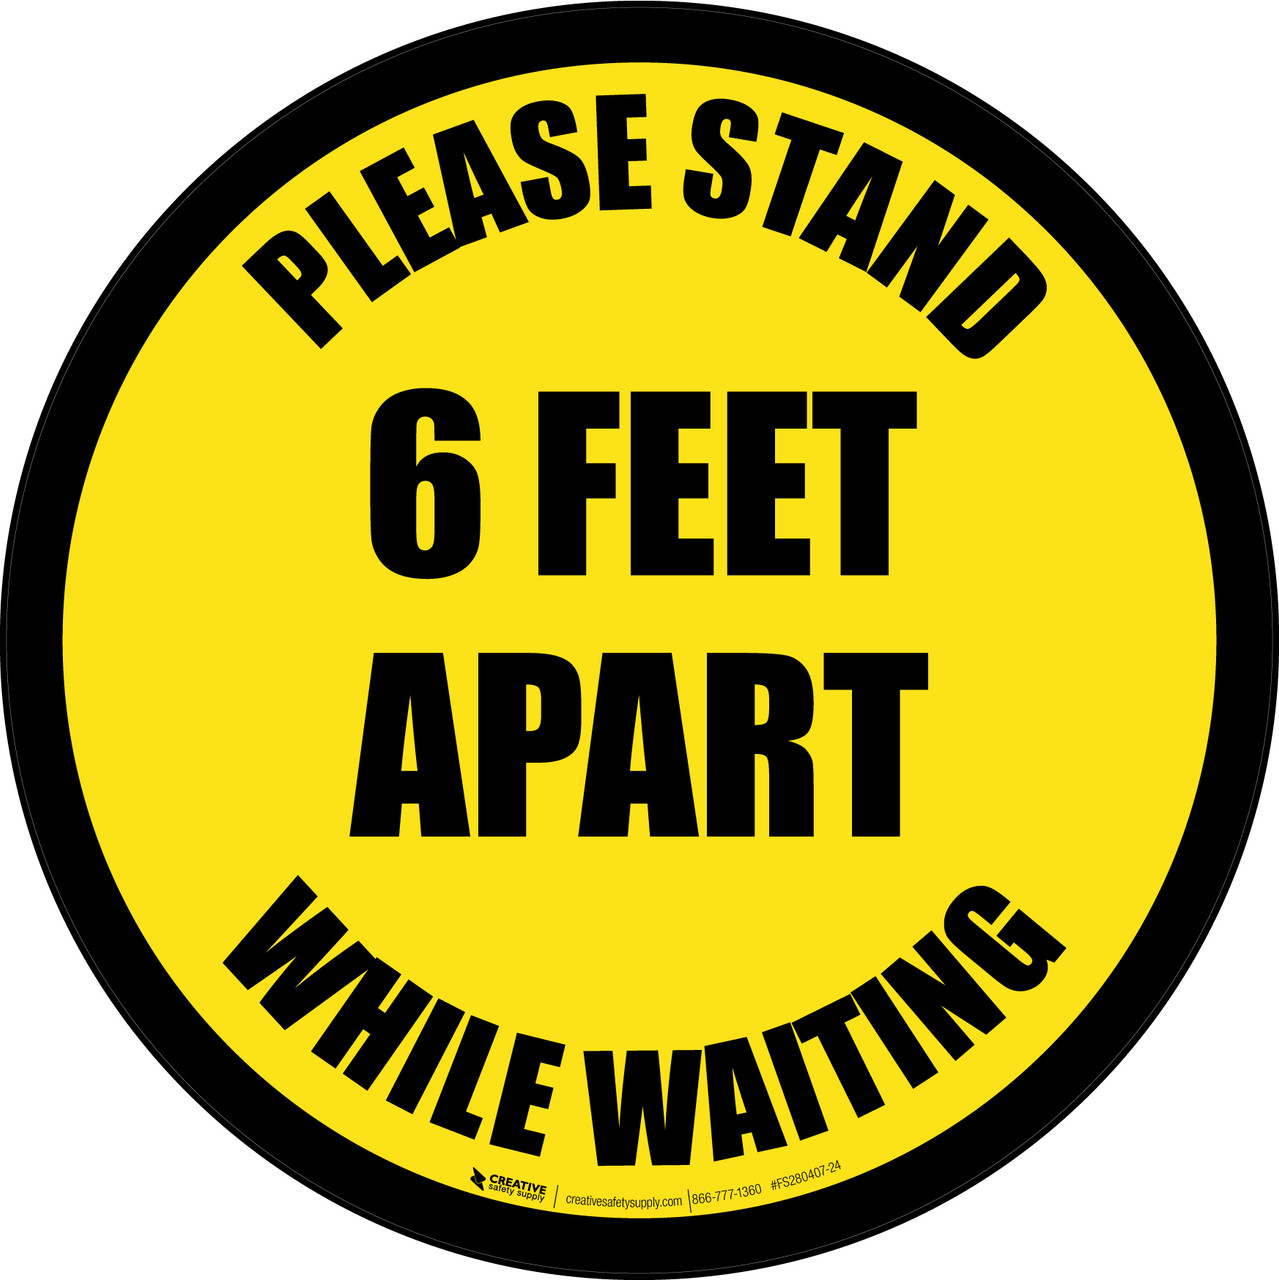 Please Stand Feet Apart While Waiting Yellow Border Circular Floor  Sign 5S Today